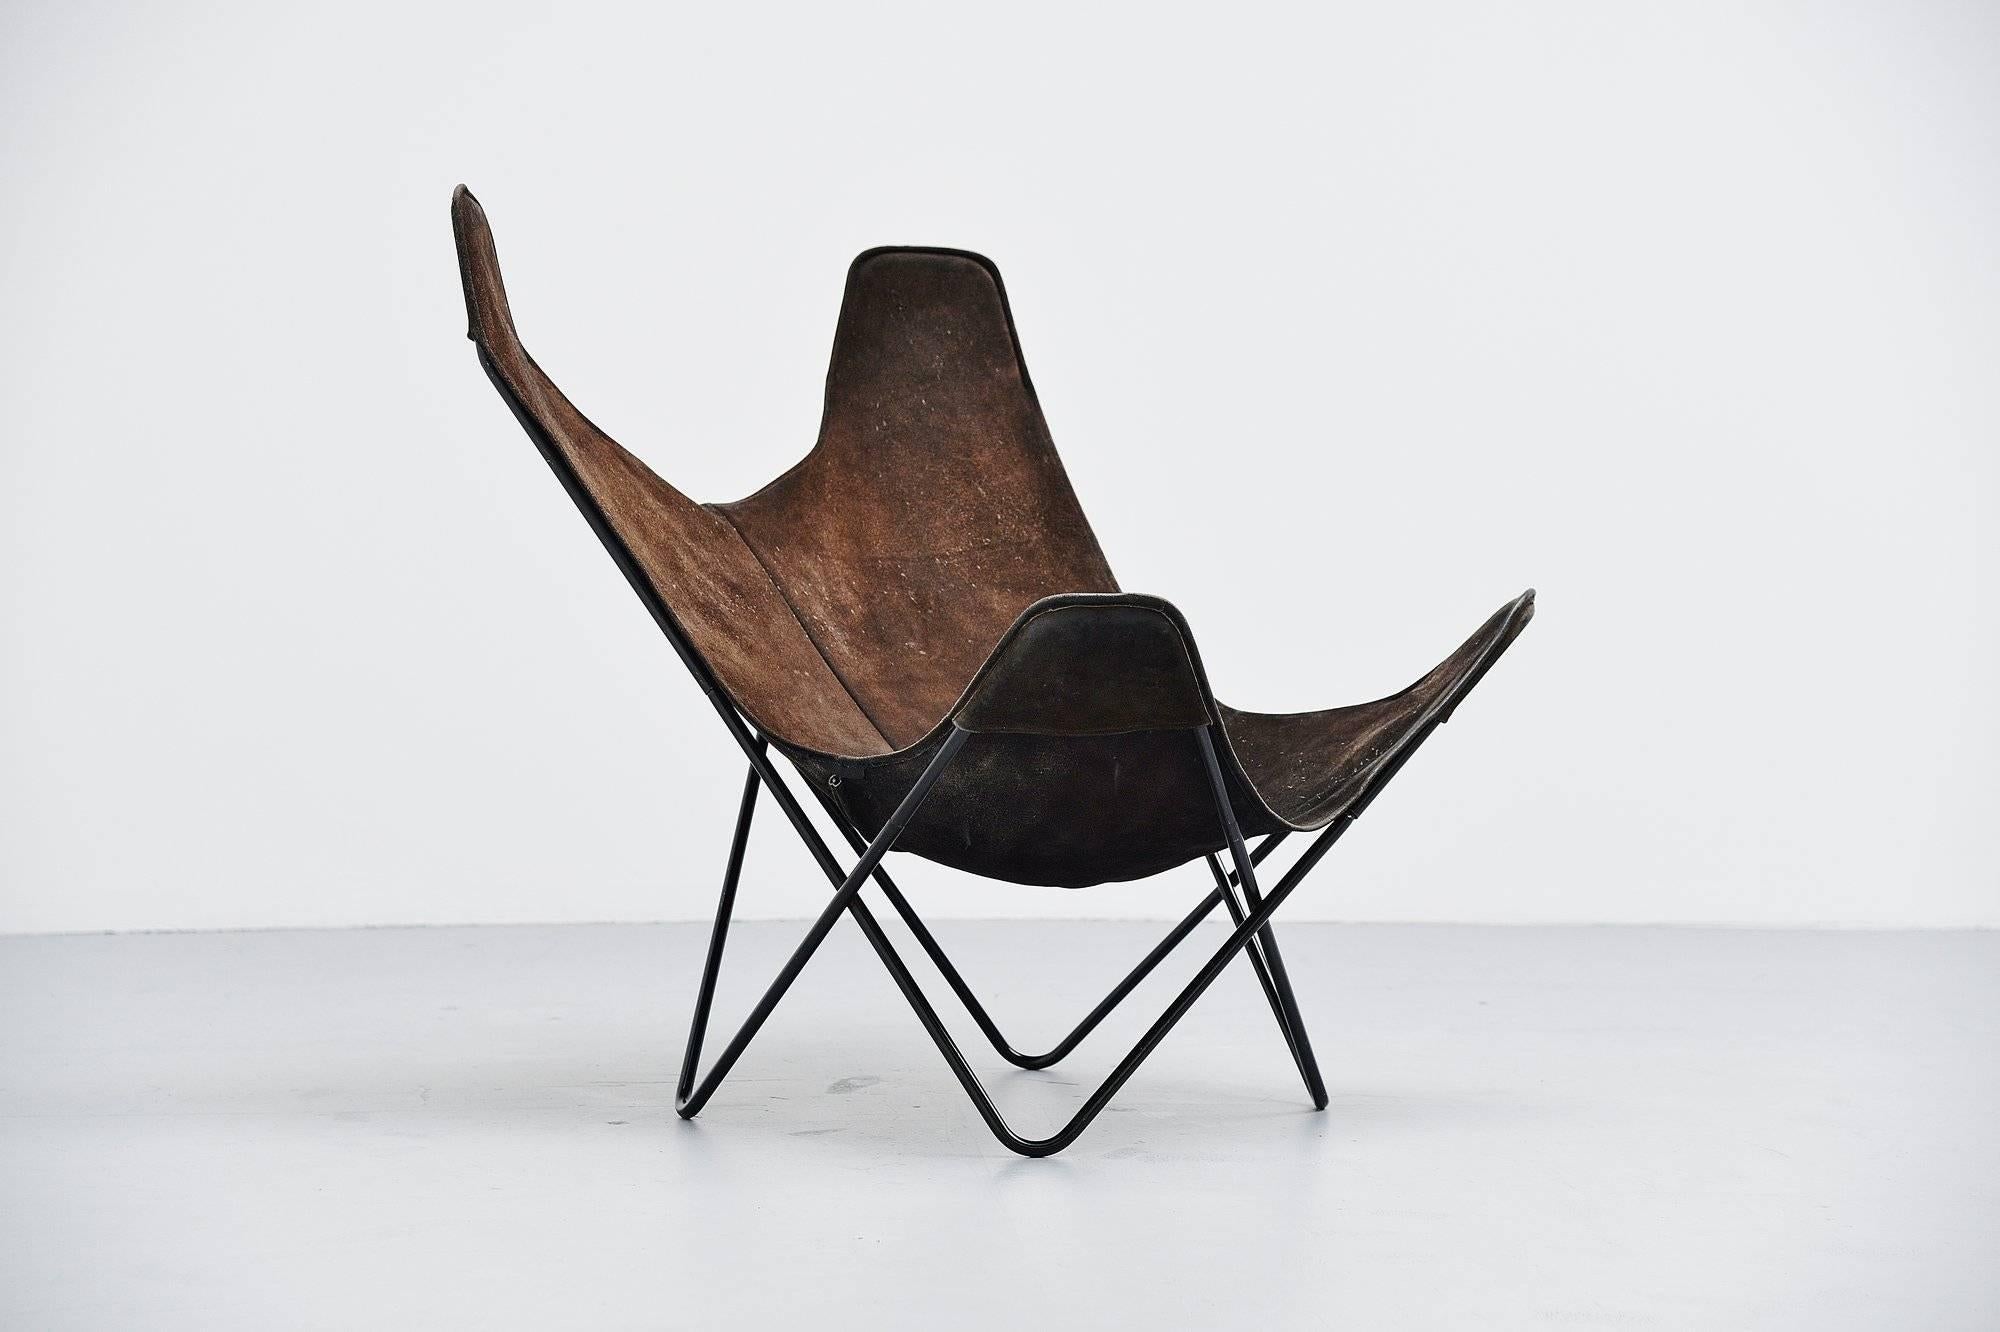 Iconic lounge chair designed by Jorge Hardoy-Ferrari for Knoll, USA 1970. This lounge chair is probably one of the most copied chairs ever. Since the chair was designed in the 1950s without copyright, every company could make it. This is the only